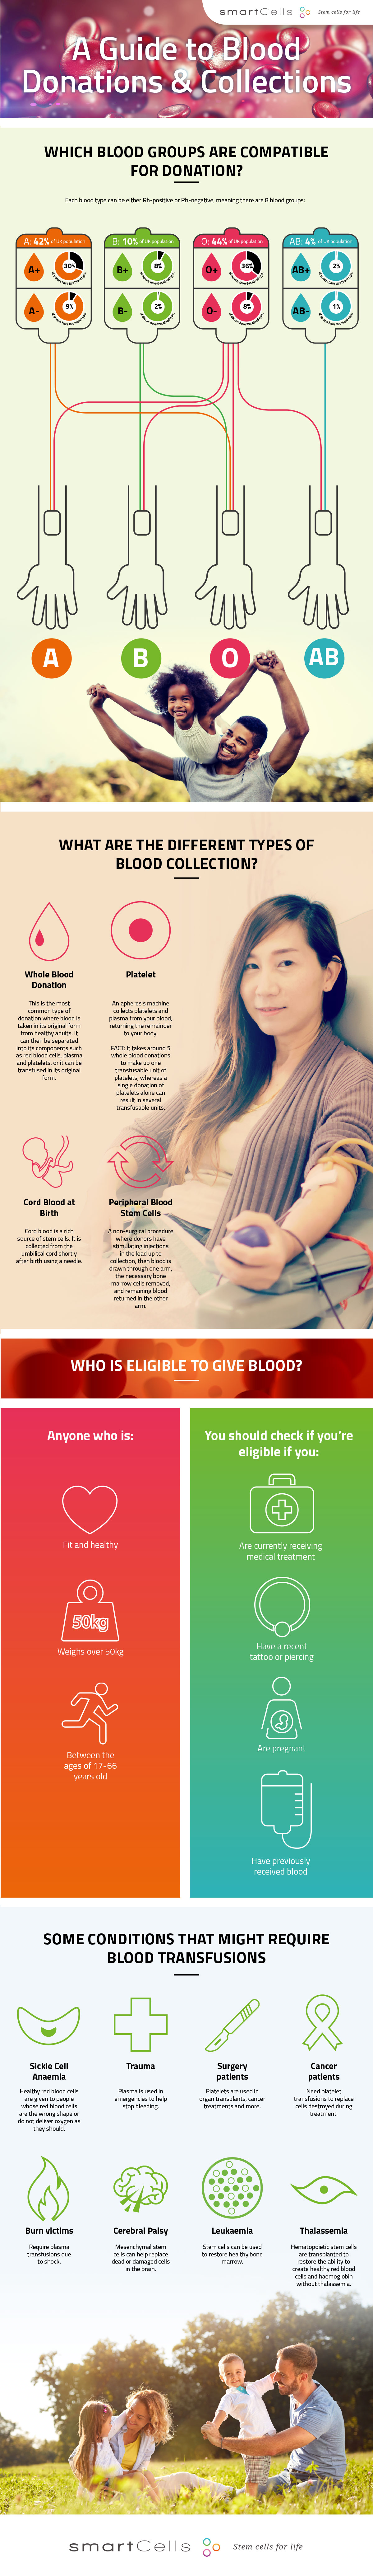 Smart Cells releases Guide to Blood Donations & Collections